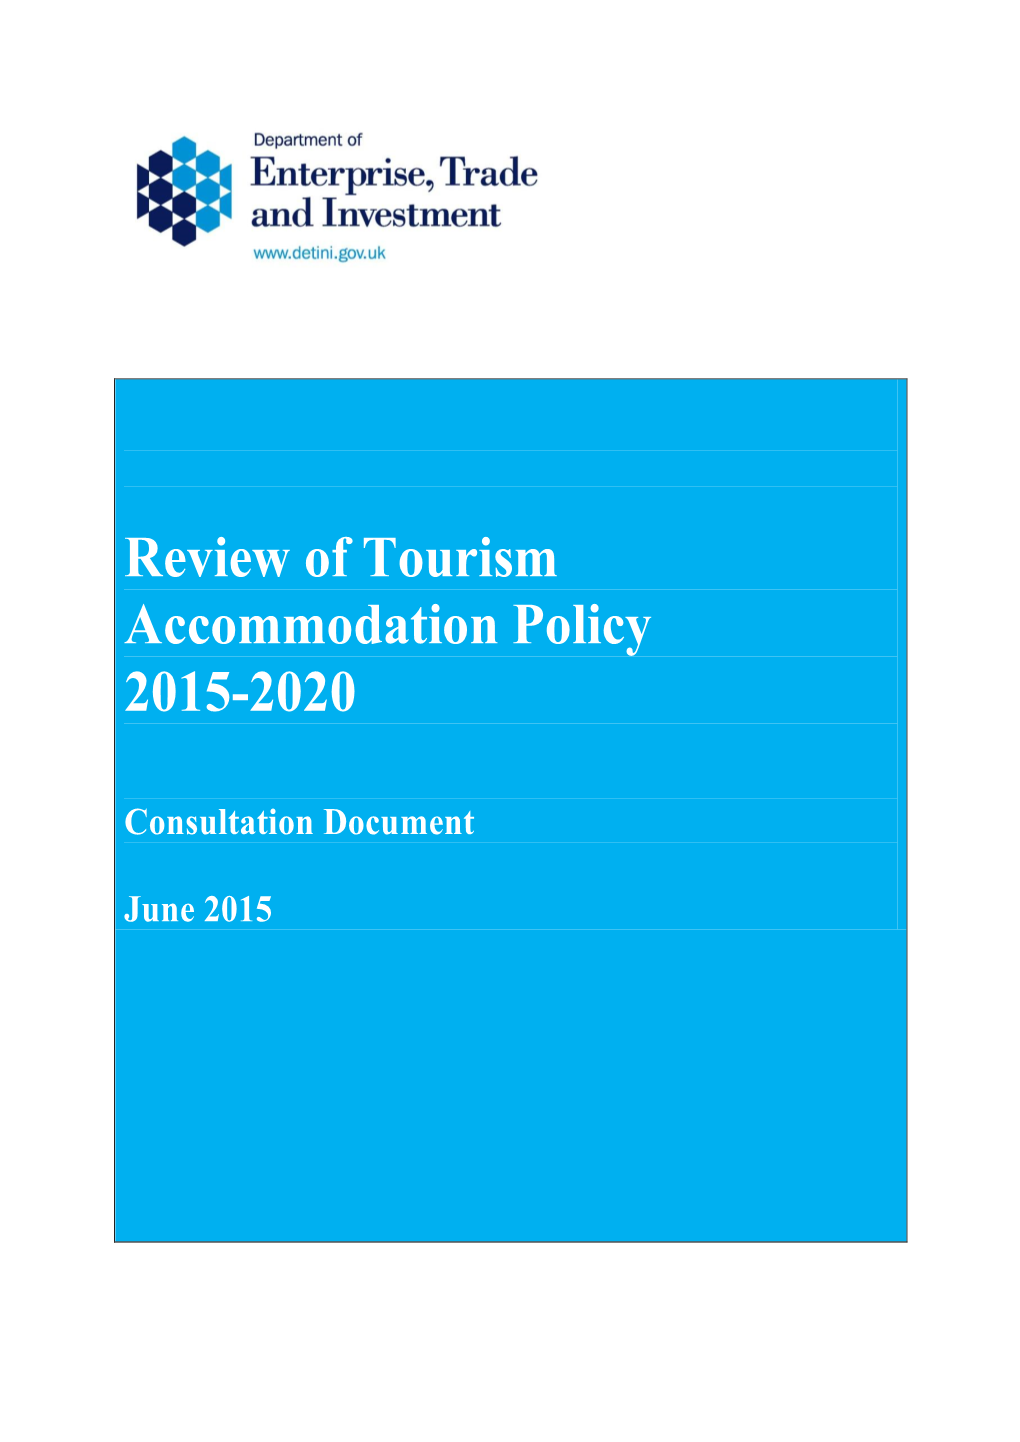 Review of Tourism Accommodation Policy 2015-2020